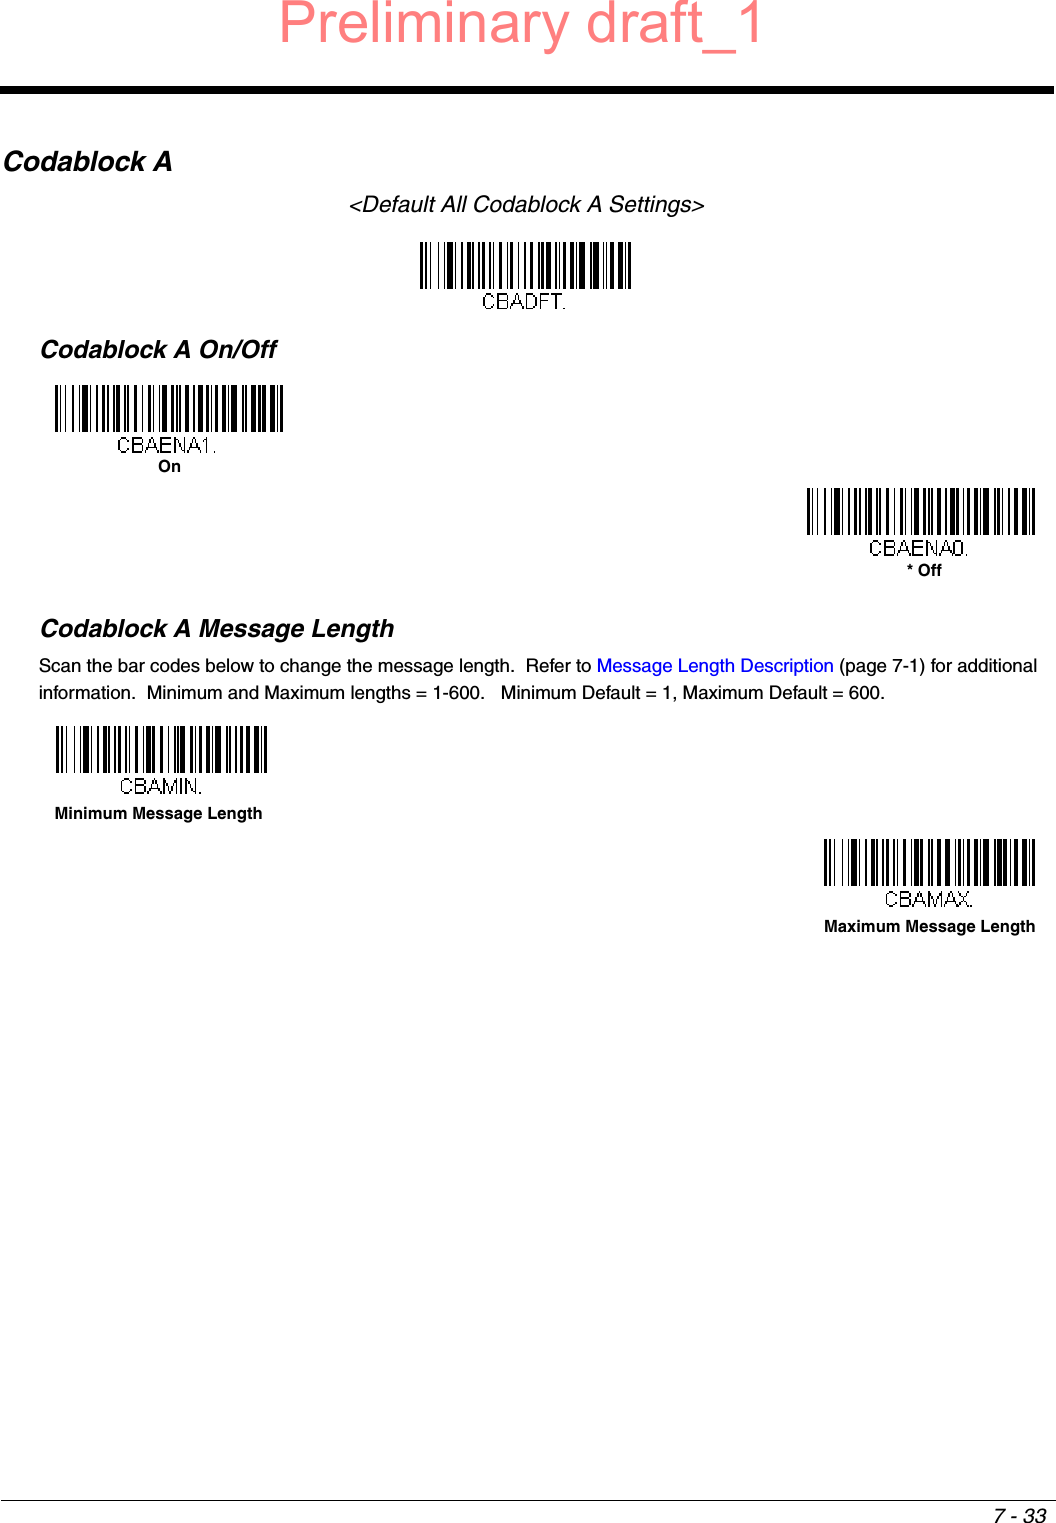 7 - 33Codablock A&lt;Default All Codablock A Settings&gt;Codablock A On/OffCodablock A Message LengthScan the bar codes below to change the message length.  Refer to Message Length Description (page 7-1) for additional information.  Minimum and Maximum lengths = 1-600.   Minimum Default = 1, Maximum Default = 600.On* OffMinimum Message LengthMaximum Message LengthPreliminary draft_1